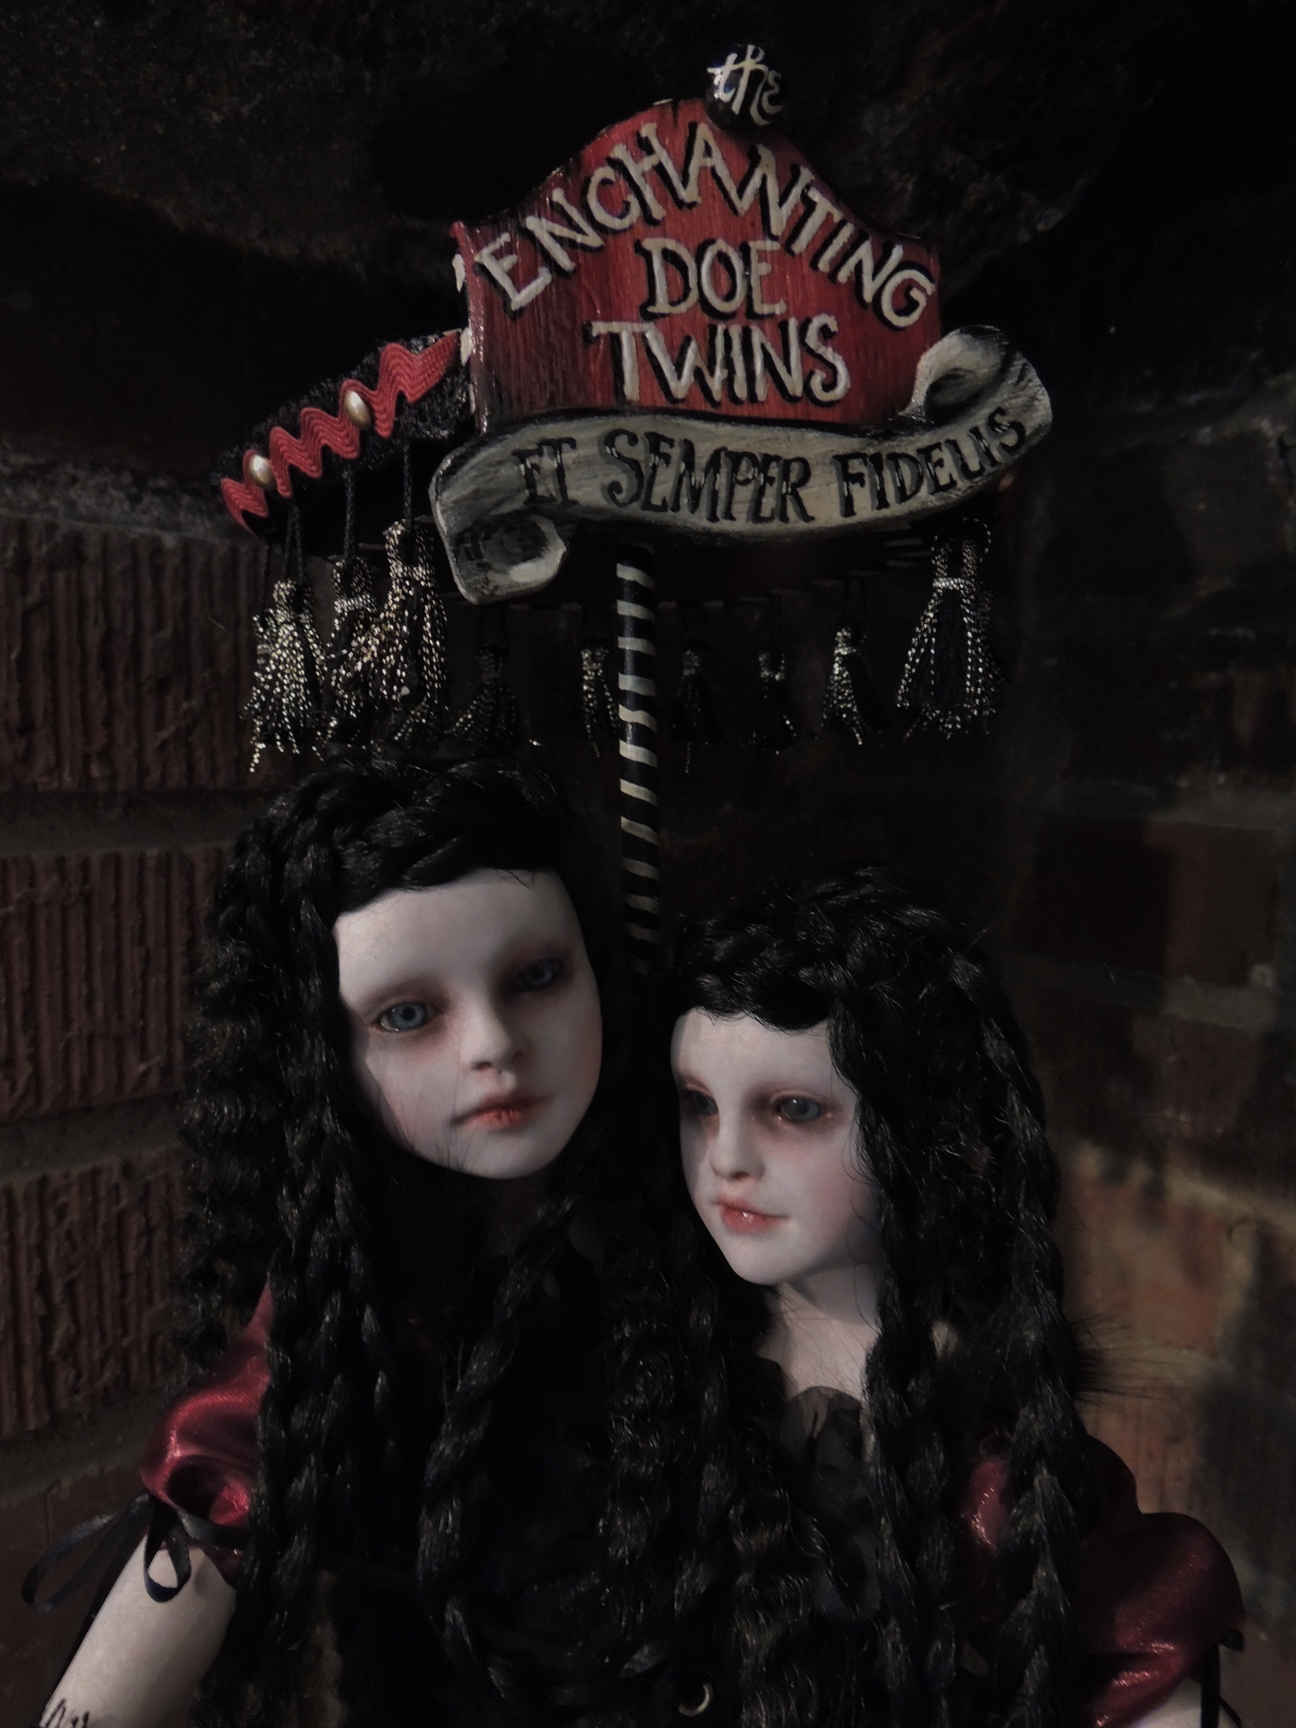 close-up of gothic conjoined twin artdolls with long crimped black hair with hand-painted red and black sign